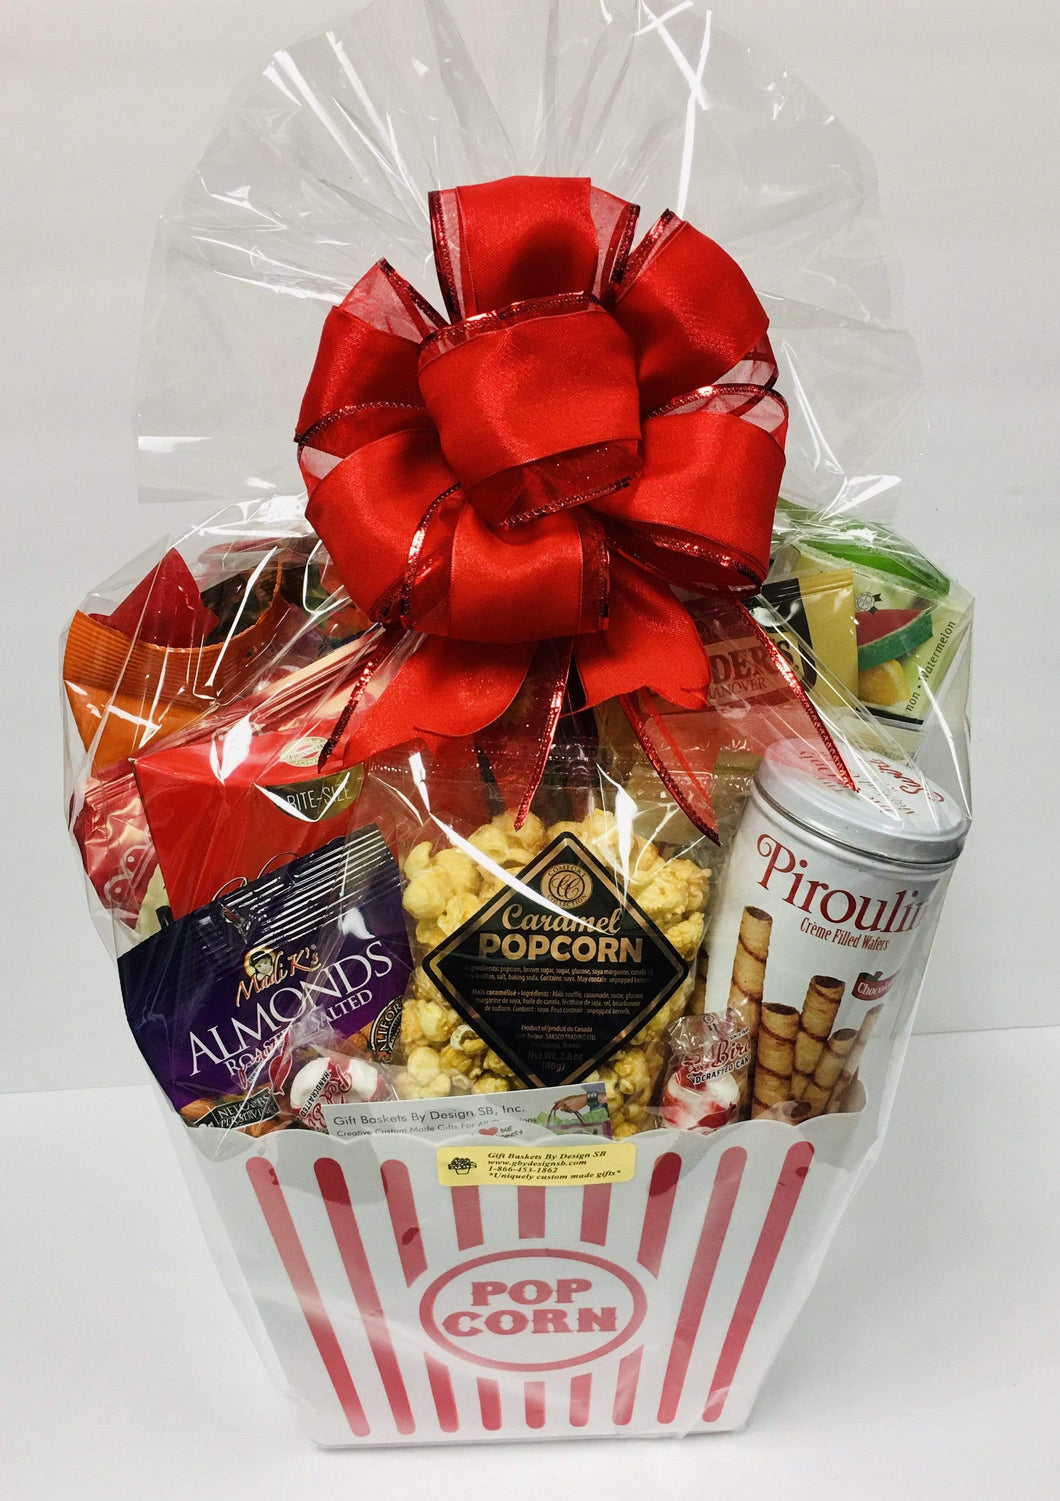 Snack Attack- 3 Size - Gift Baskets By Design SB, Inc.